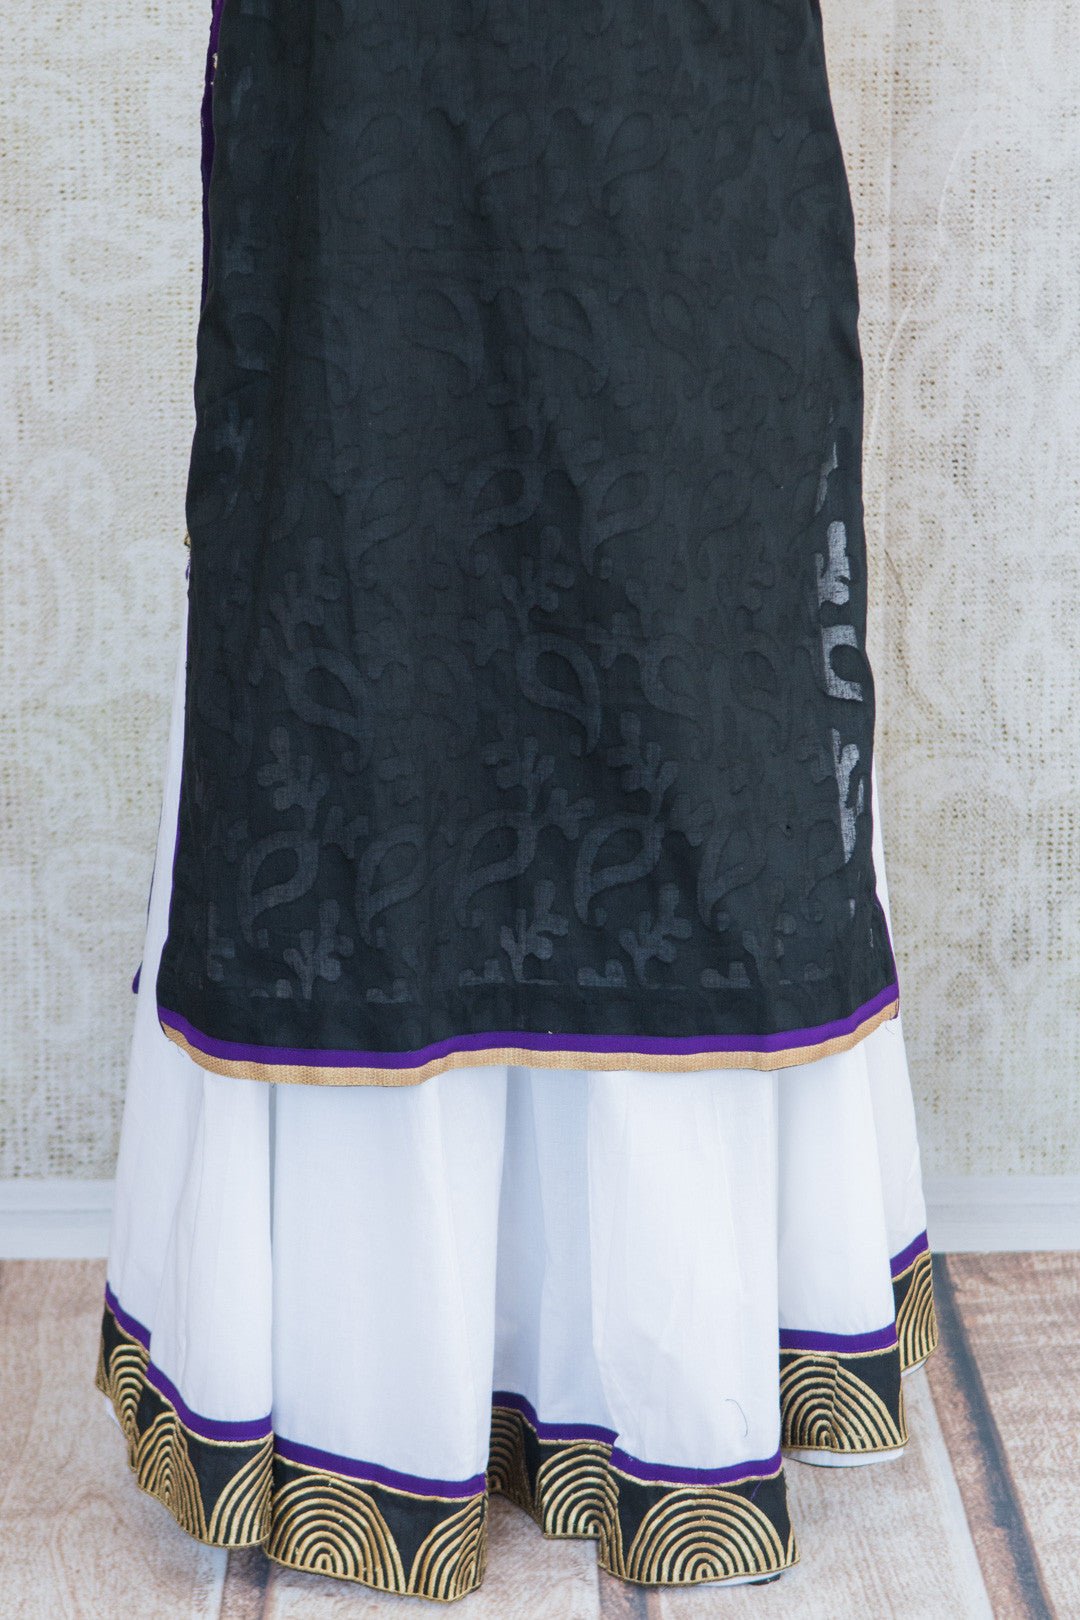 501076-suit-short-sleeve-black-purple-white-gold-silver-embroidery-scarf-skirt-view